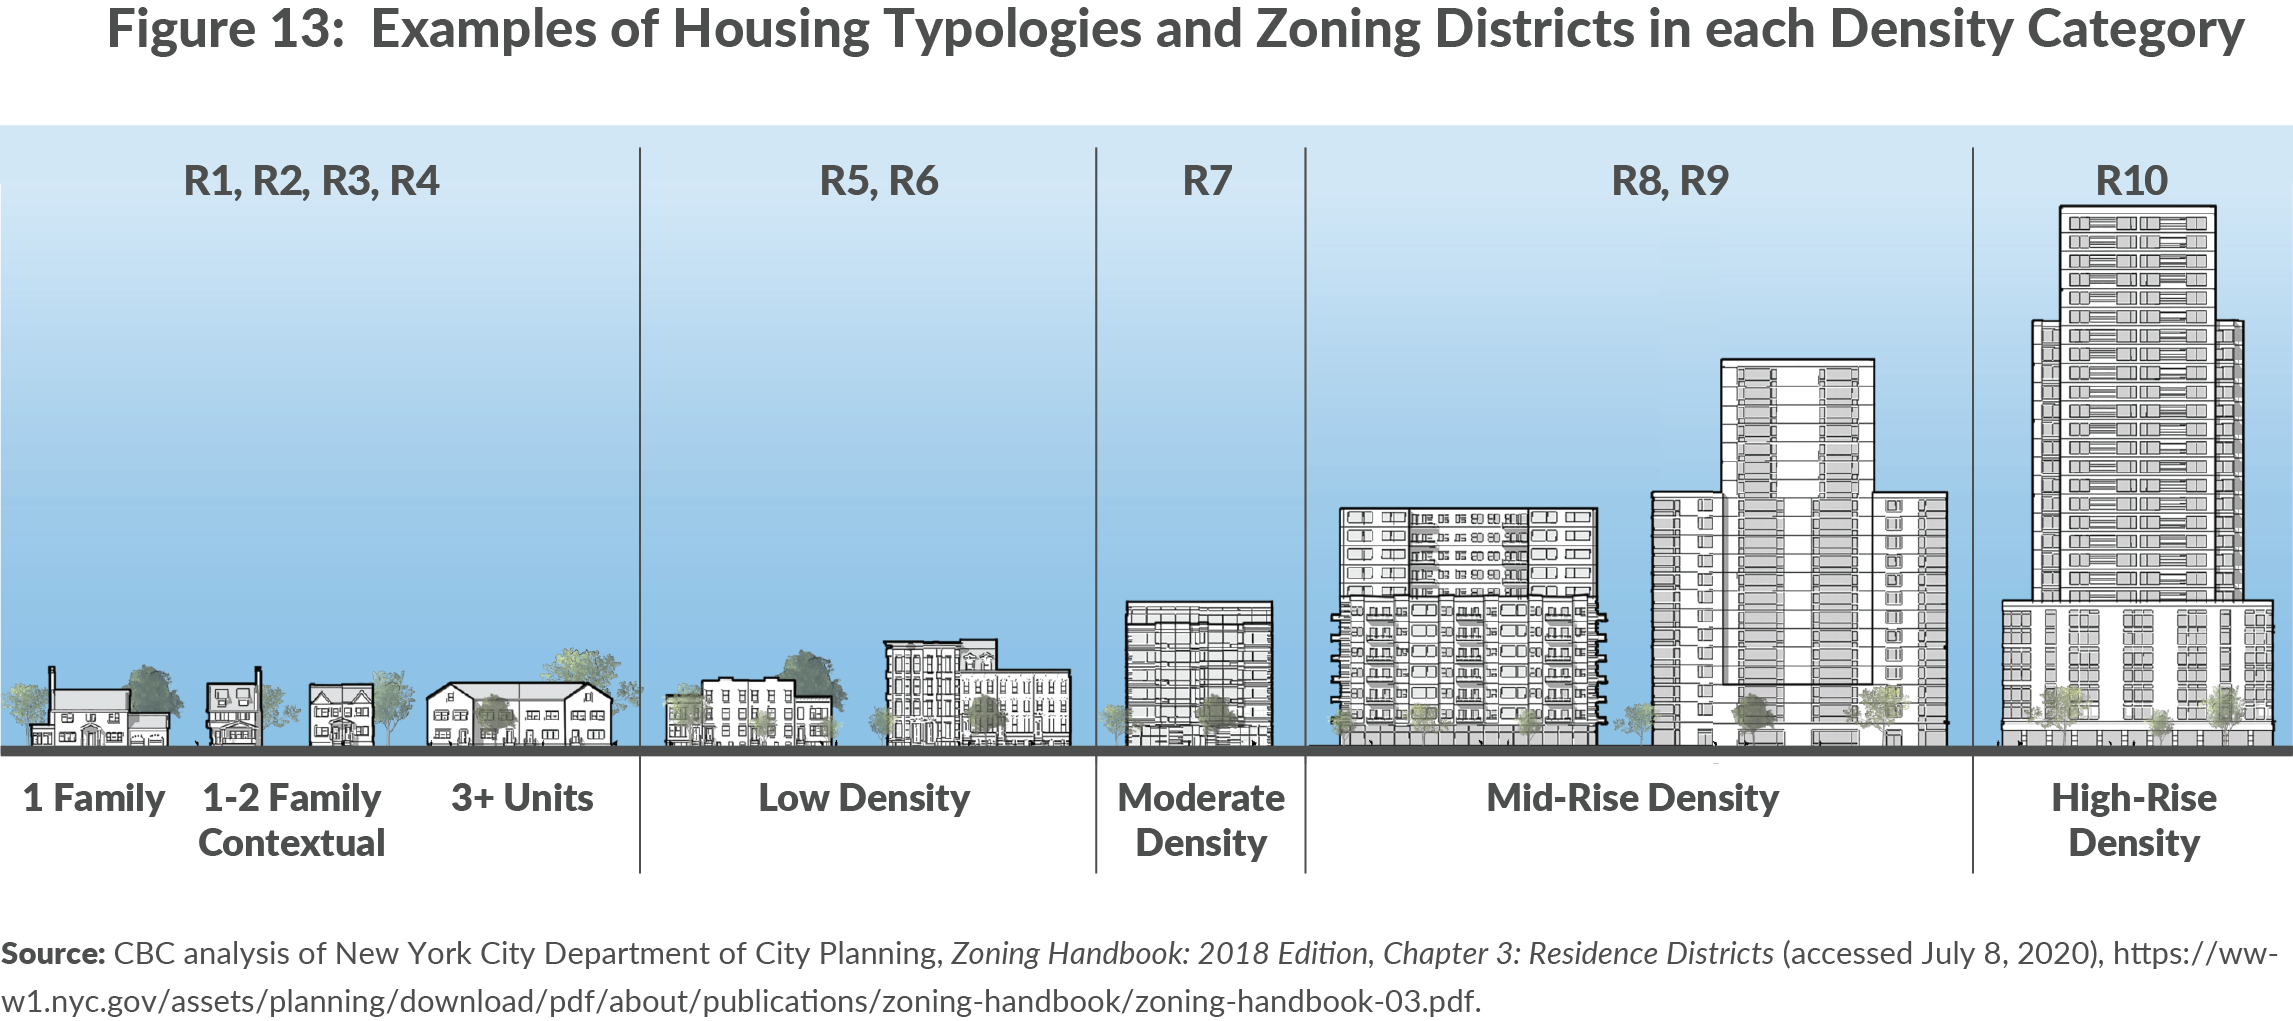 Figure 13. Examples of Housing Typologies and Zoning Districts in each Density Category